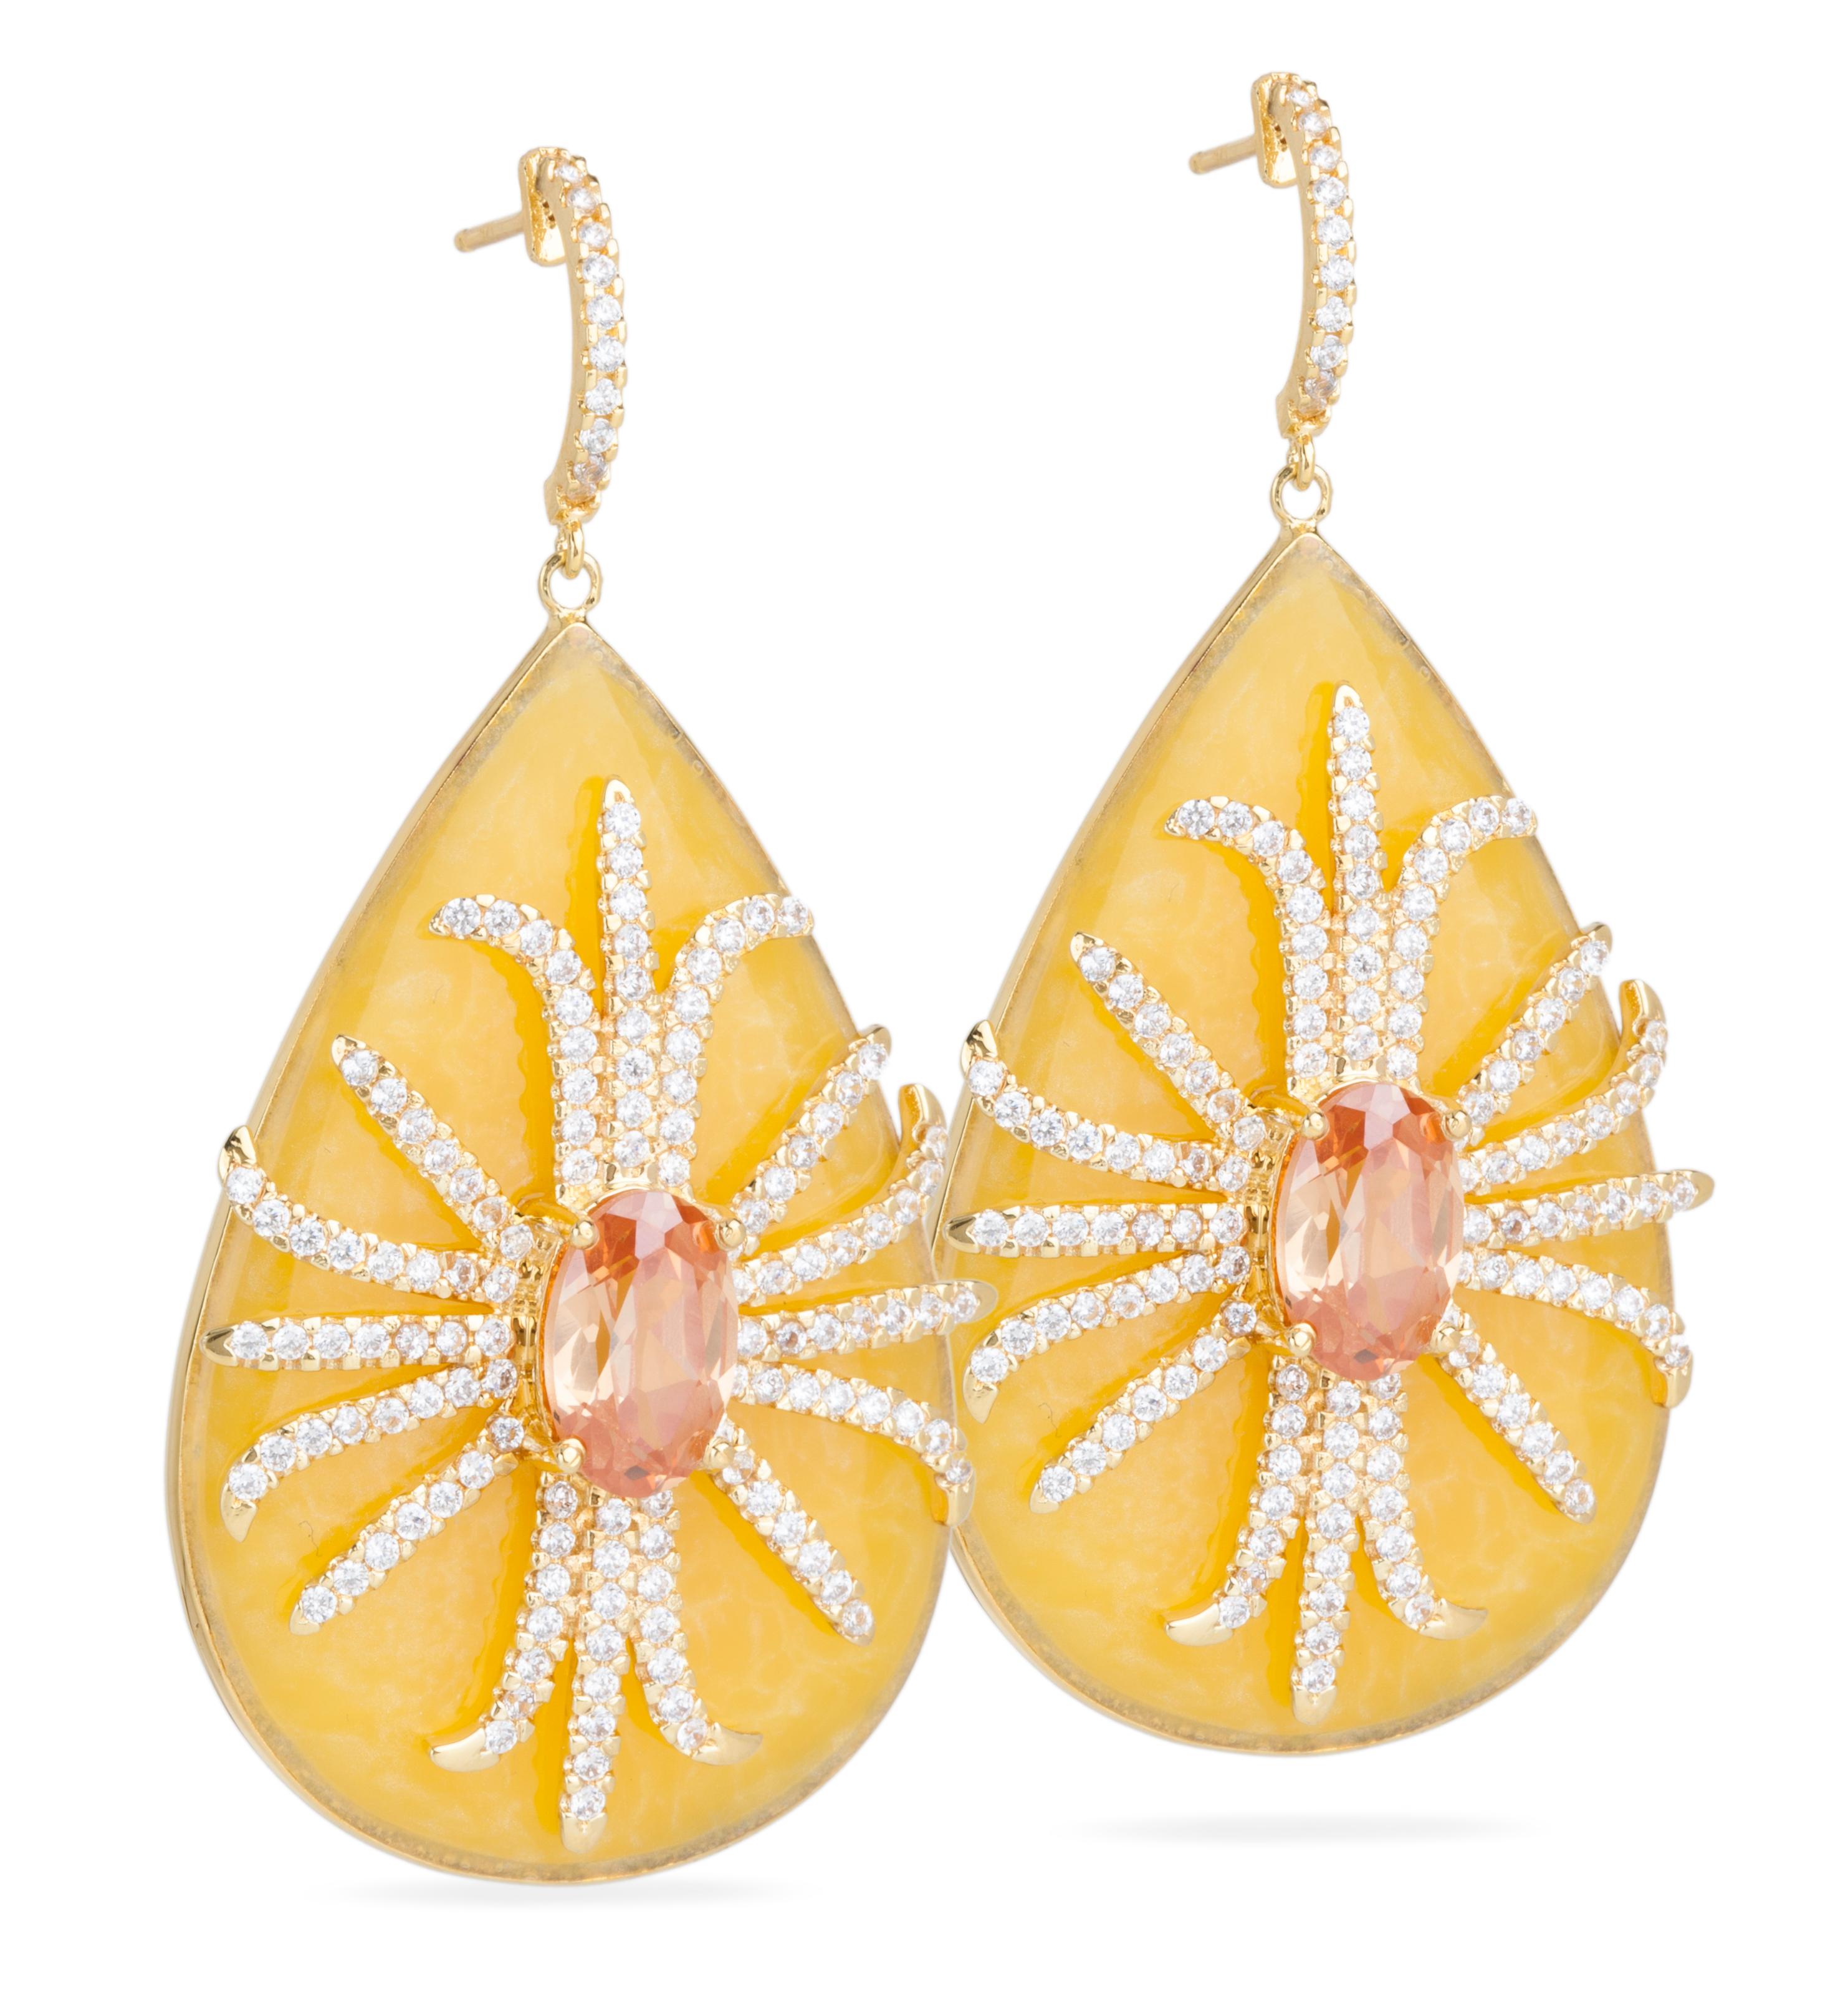 Miriam Salat (MIRIM) Honey Resin and Topaz Drop Earrings - This fantastic Miriam Salat earrings feature  a middle eastern design made up of white and honey topaz full facet stones, set in sterling silver gold plated on honey resin. Channel set topaz